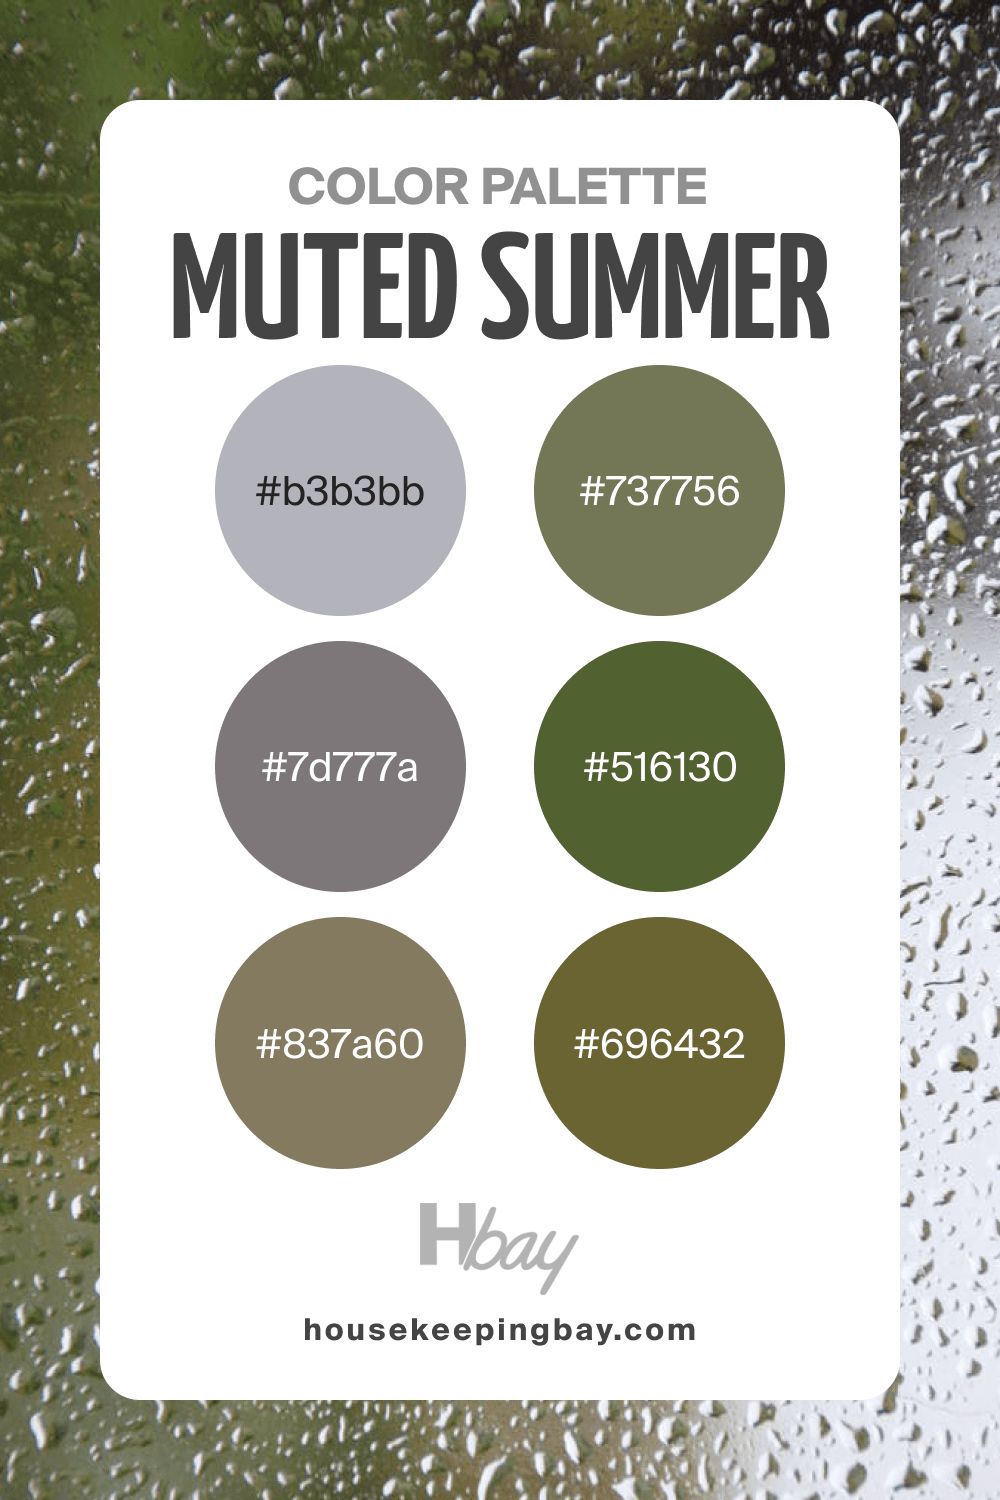 Summer color palette muted